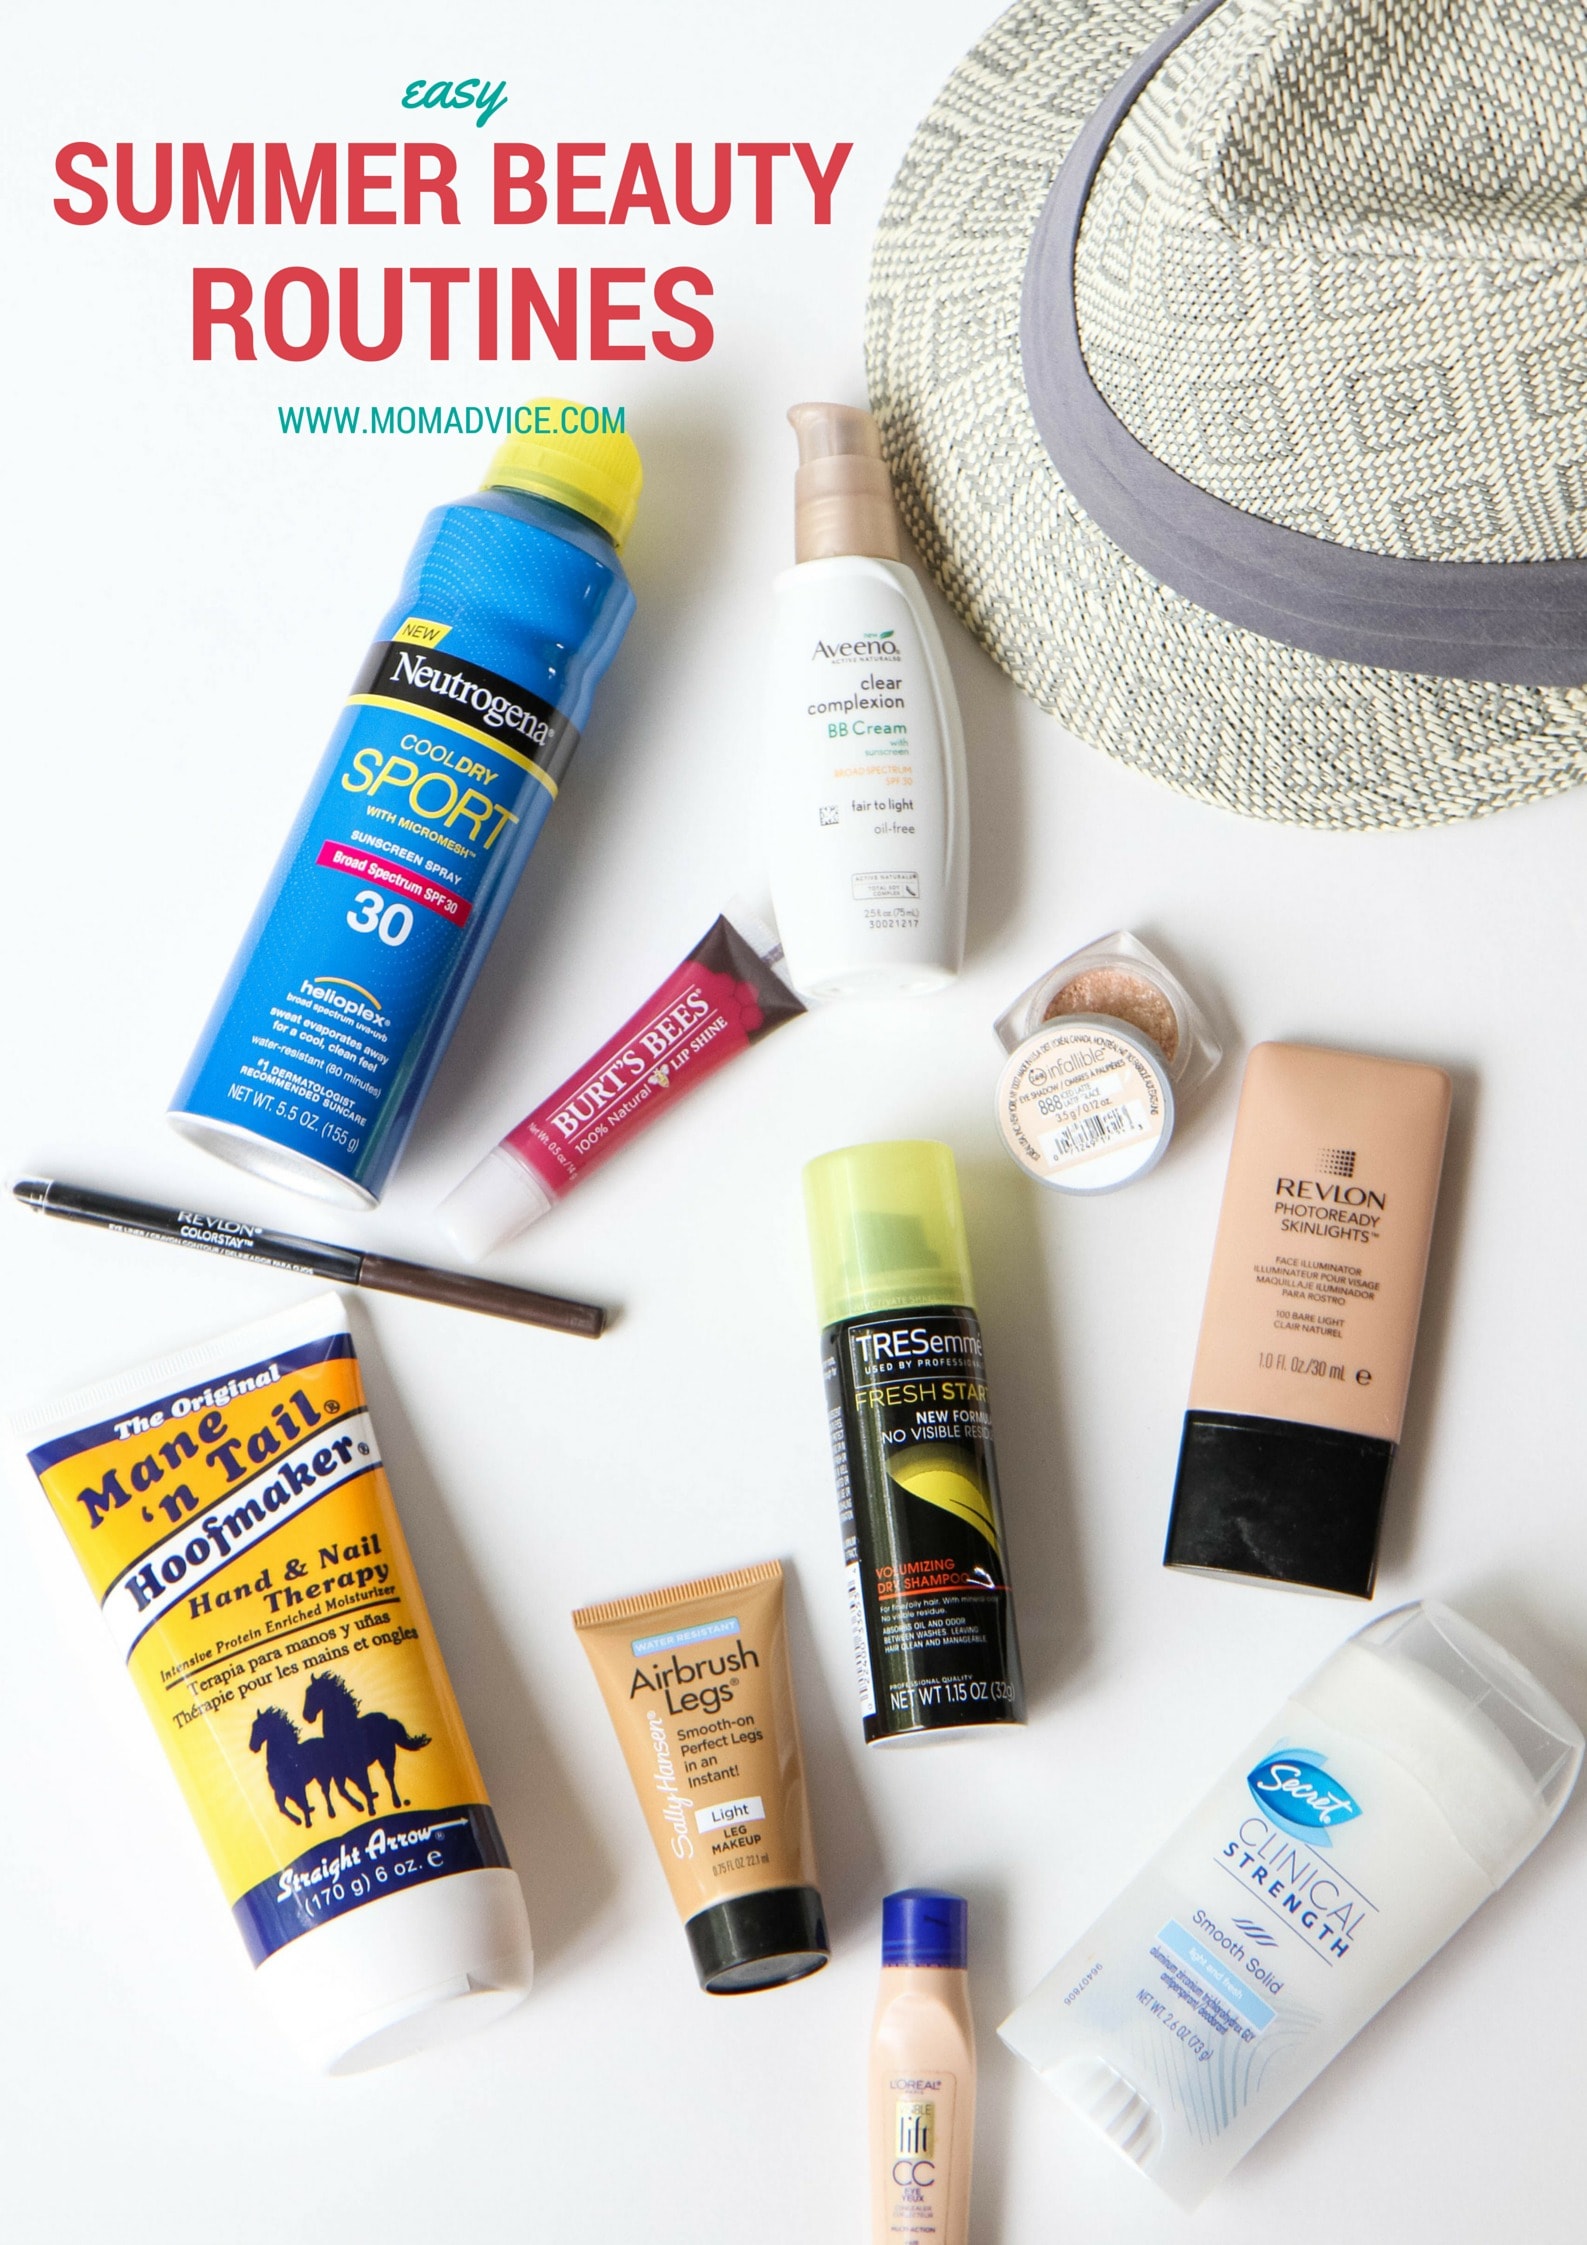 Easy Summer Beauty Routines from MomAdvice.com